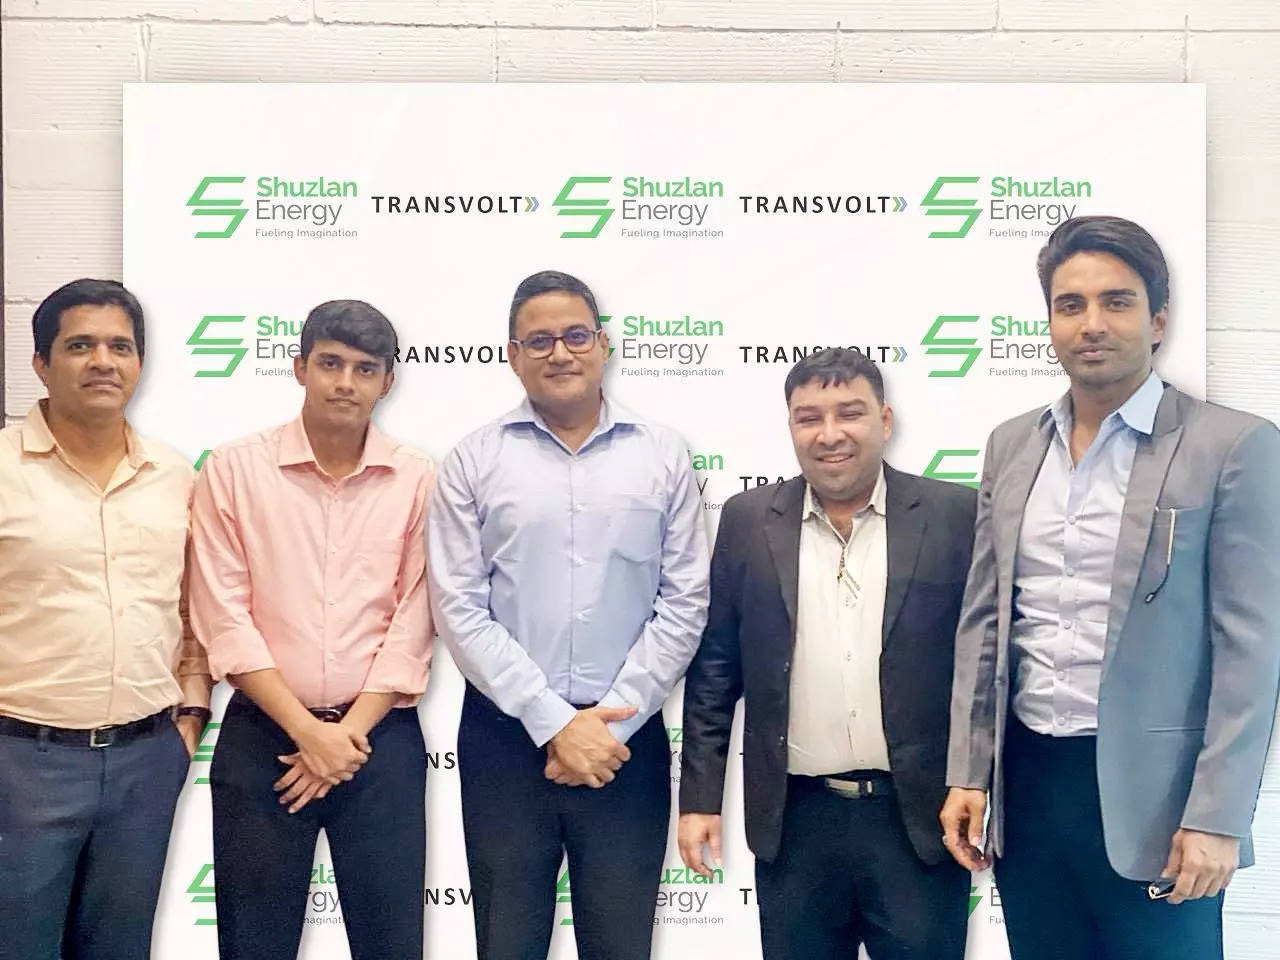 <p>The collaboration between Shuzlan Energy and Transvolt Mobility has paved the way for a cleaner and greener future, encouraging the adoption of electric buses and facilitating widespread access to reliable and convenient EV charging solutions, the release said.</p>